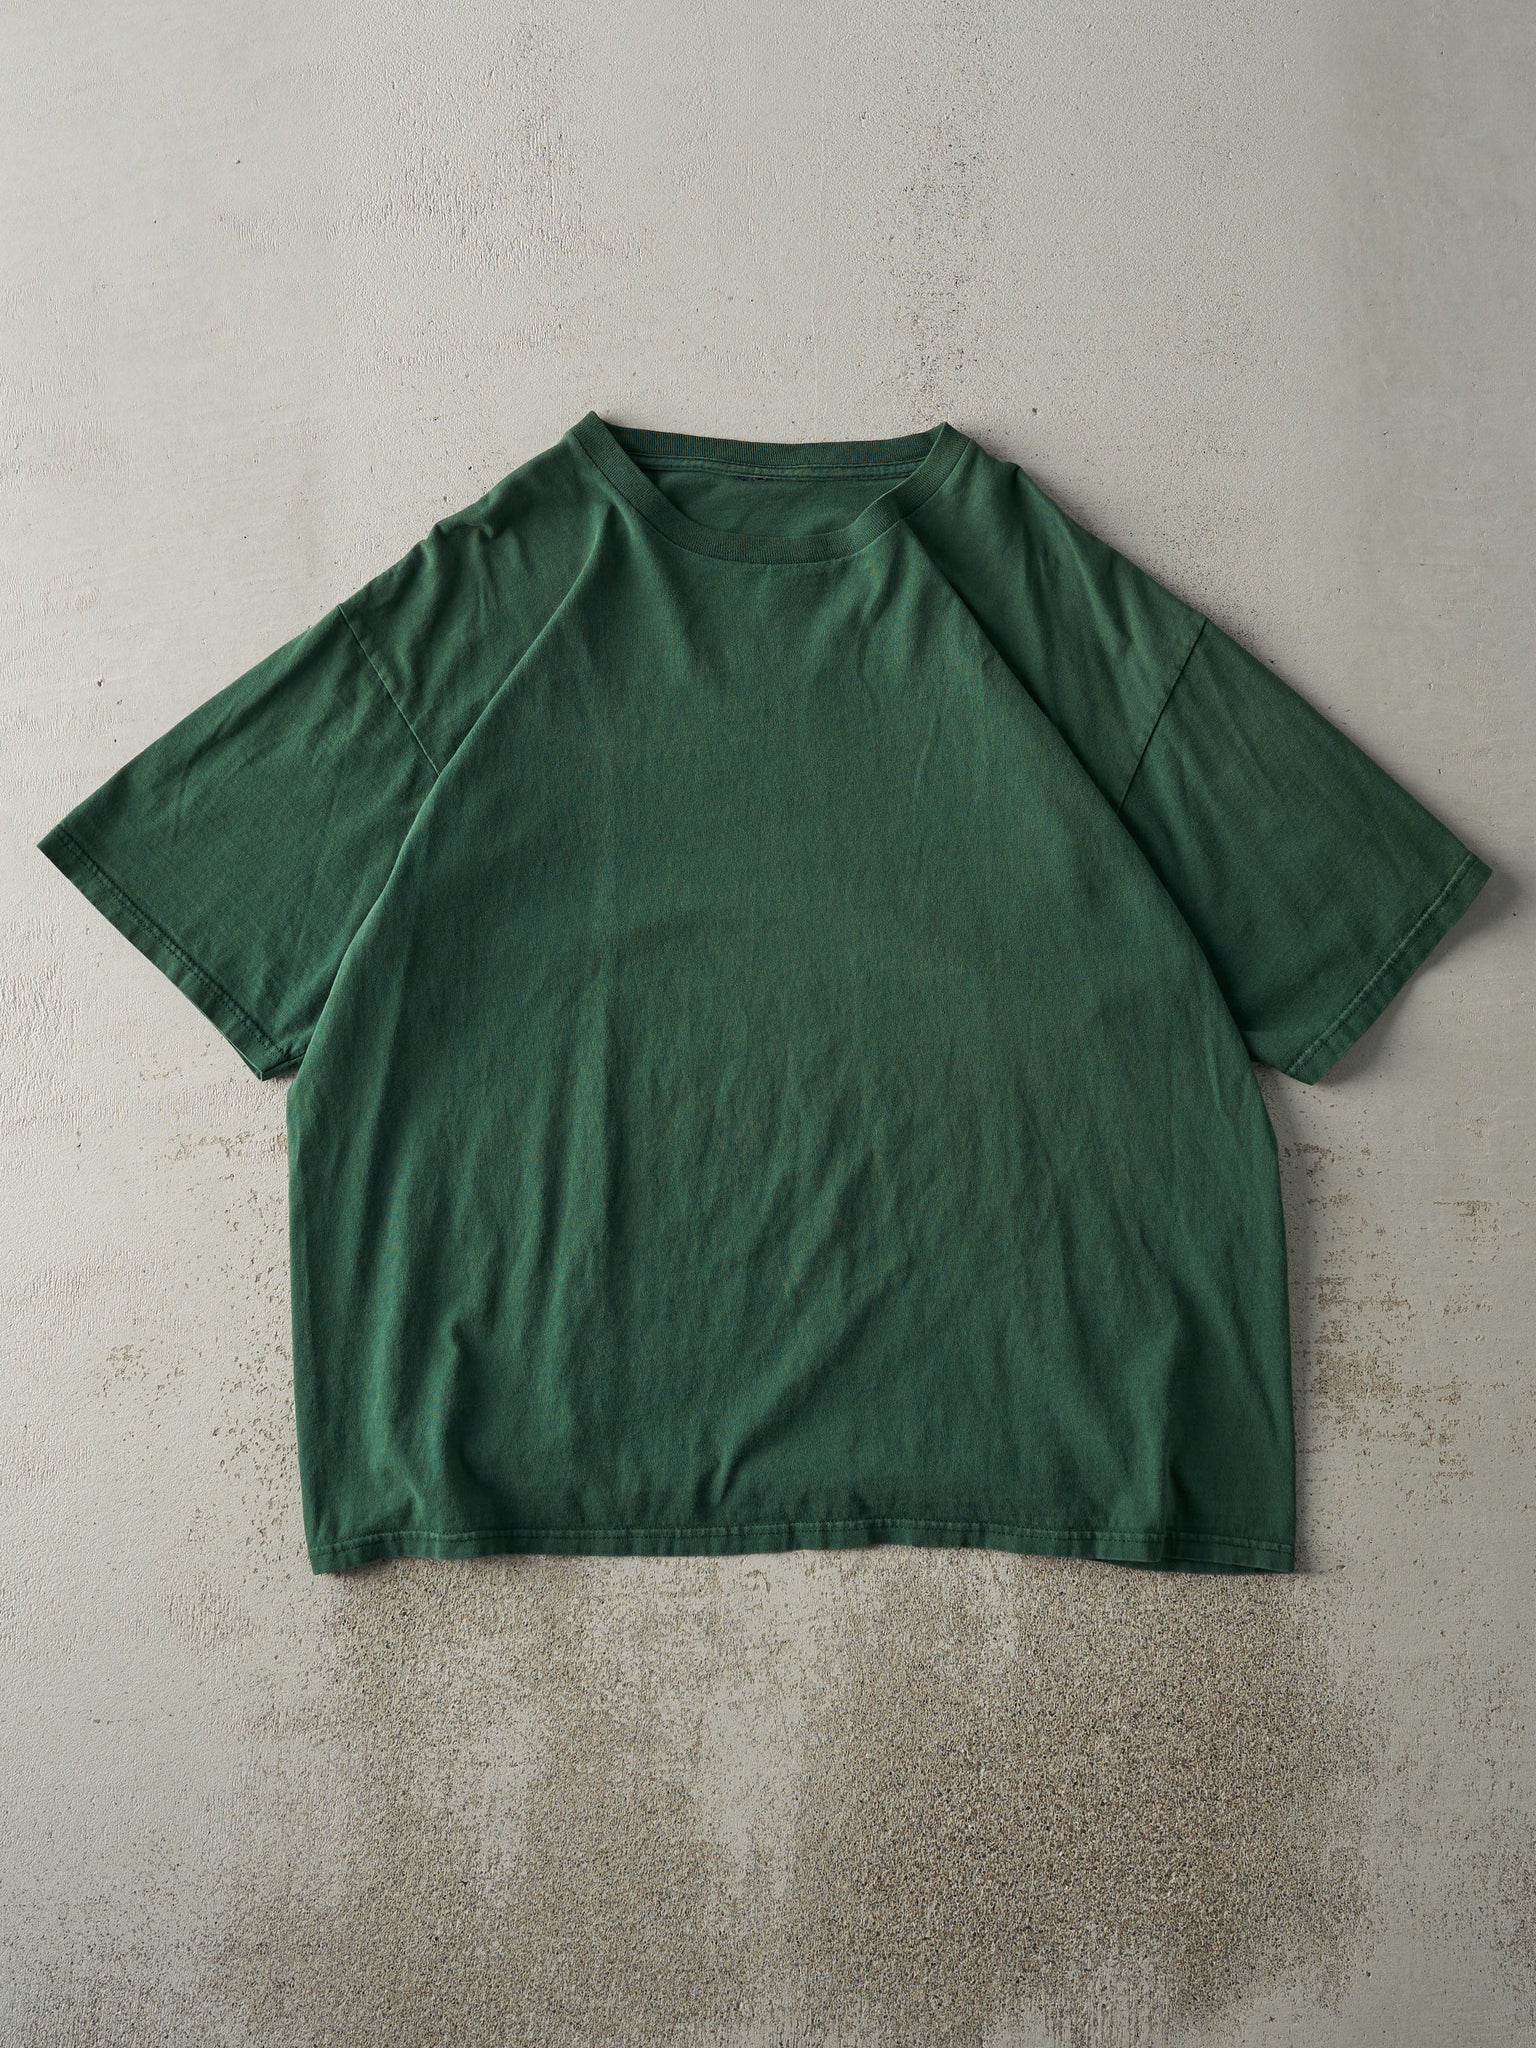 Vintage 90s Forest Green Blank Tee (L/XL)